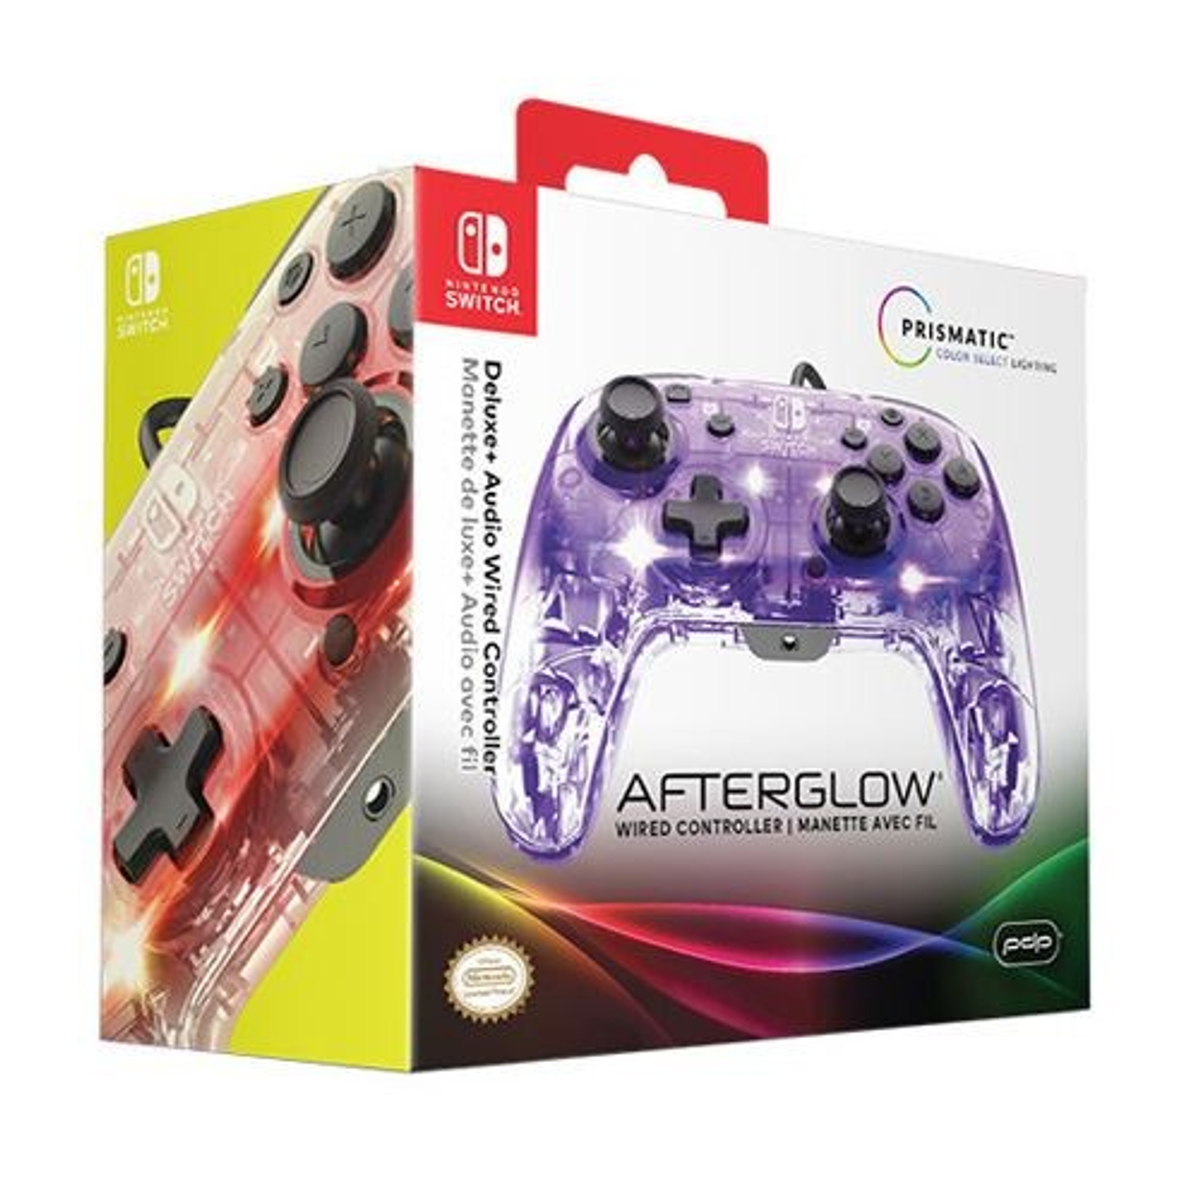 PDP 500-132-EU AFTERGLOW DELUXE CONTROLLER Durchsichtig Controller AUDIO WIRED